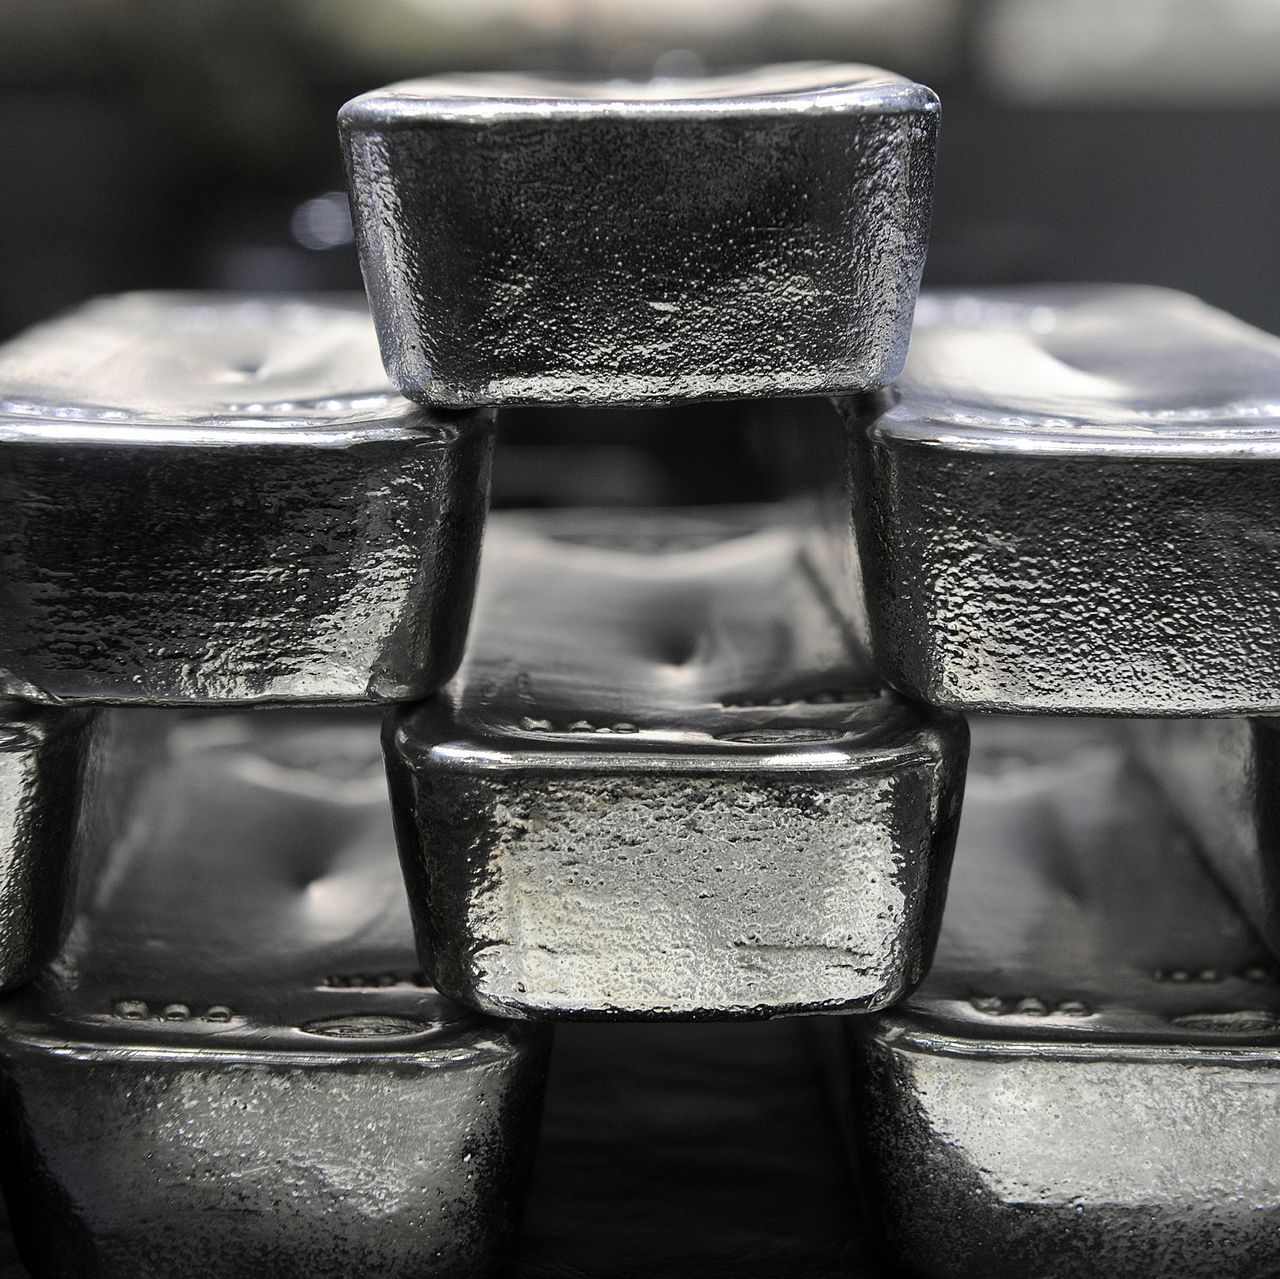 Expect Catch Up Rally In Silver In Second Half Of 2020: Adrian Ash